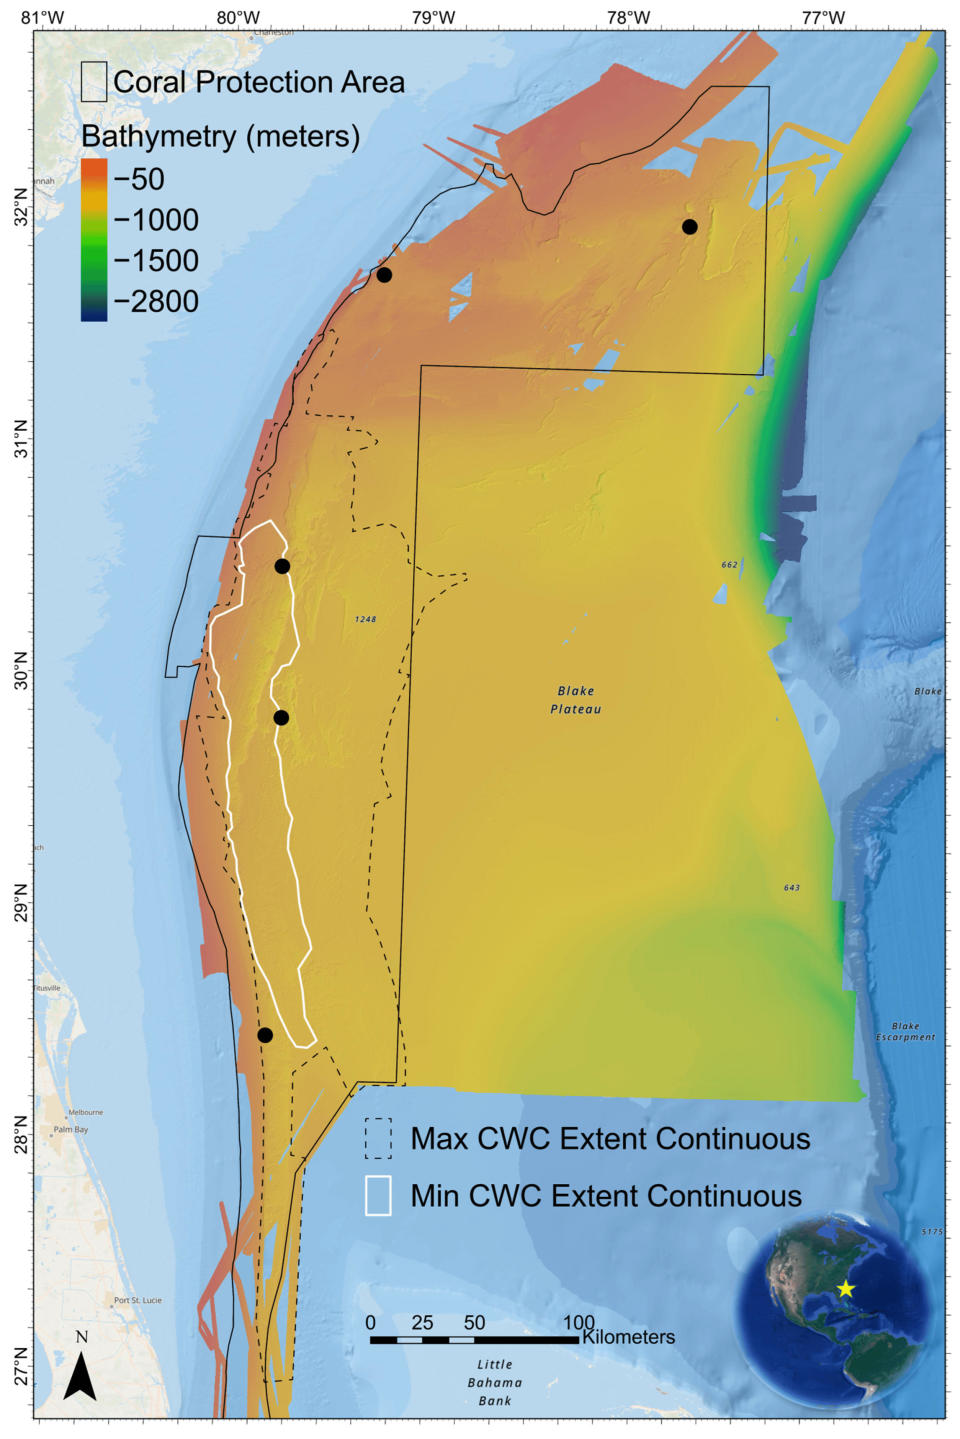 31 different multibeam sonar surveys led researchers to discover the extent of a deep-sea coral reef off the southeastern U.S. – the largest ever found.  / Credit: Derek C. Sowers, et al., "Mapping and Geomorphic Characterization of the Vast Cold-Water Coral Mounds of the Blake Plateau"